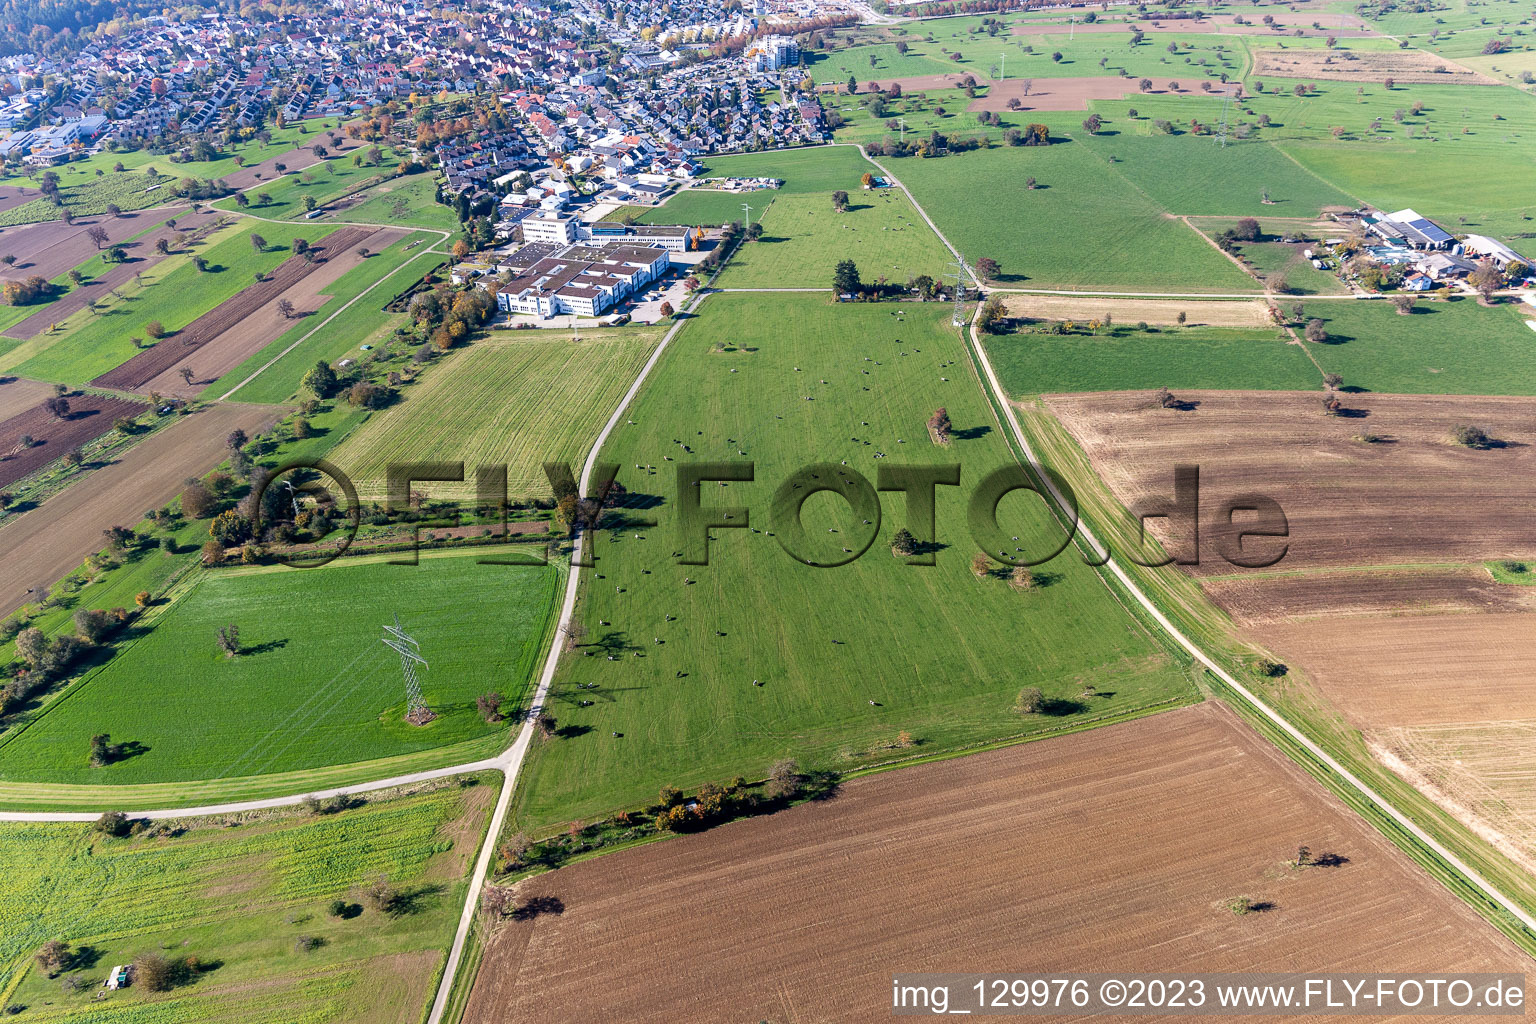 Aerial view of Cattle pasture in the district Langensteinbach in Karlsbad in the state Baden-Wuerttemberg, Germany